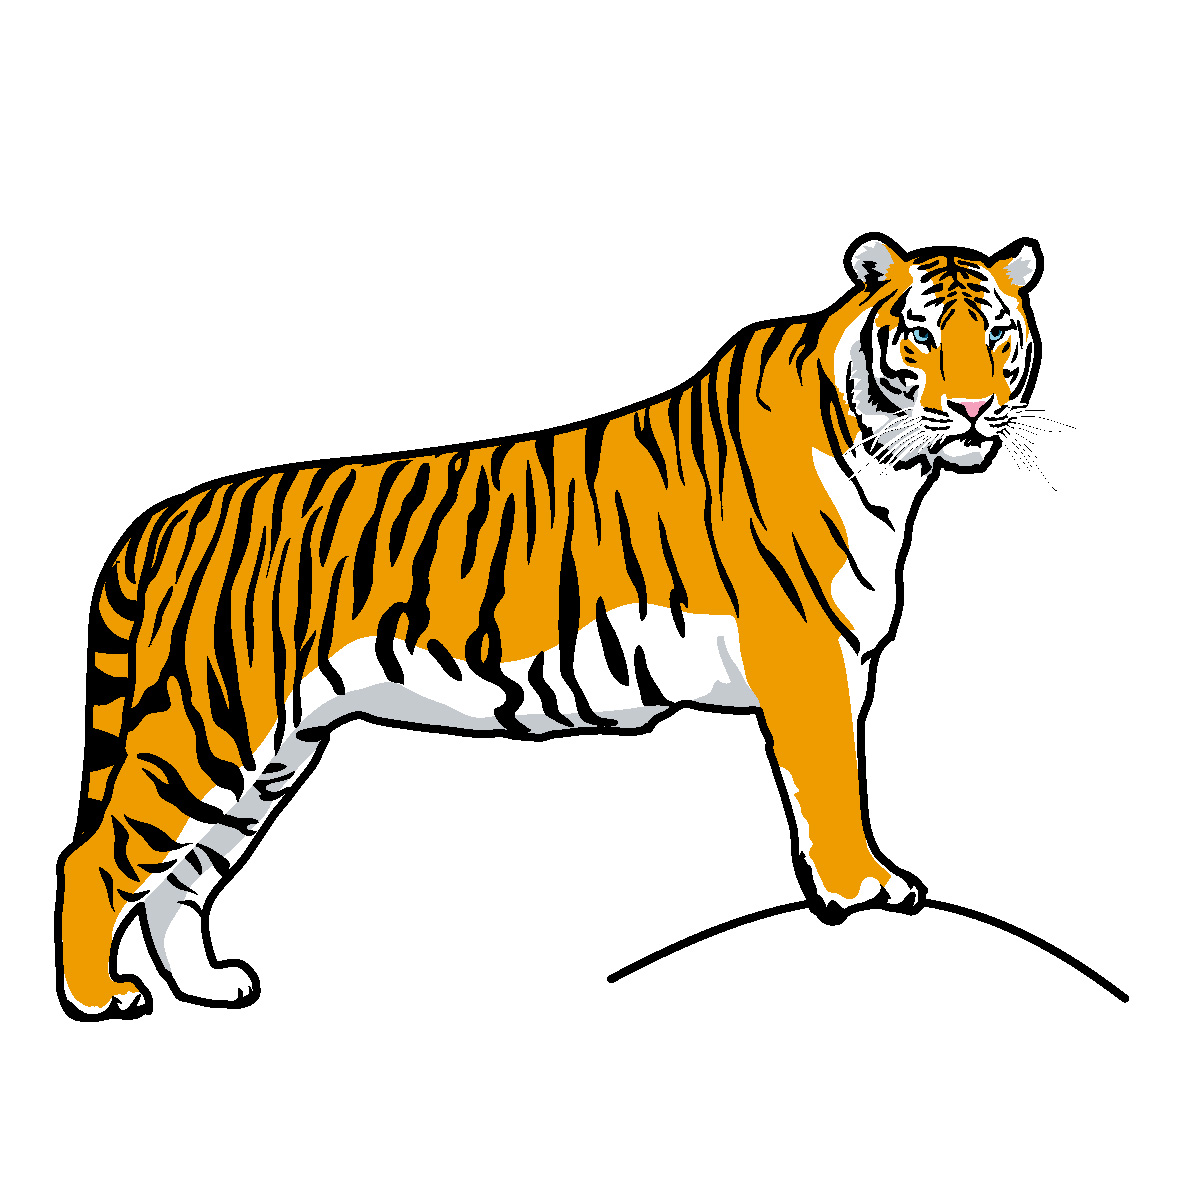 running tiger clipart black and white